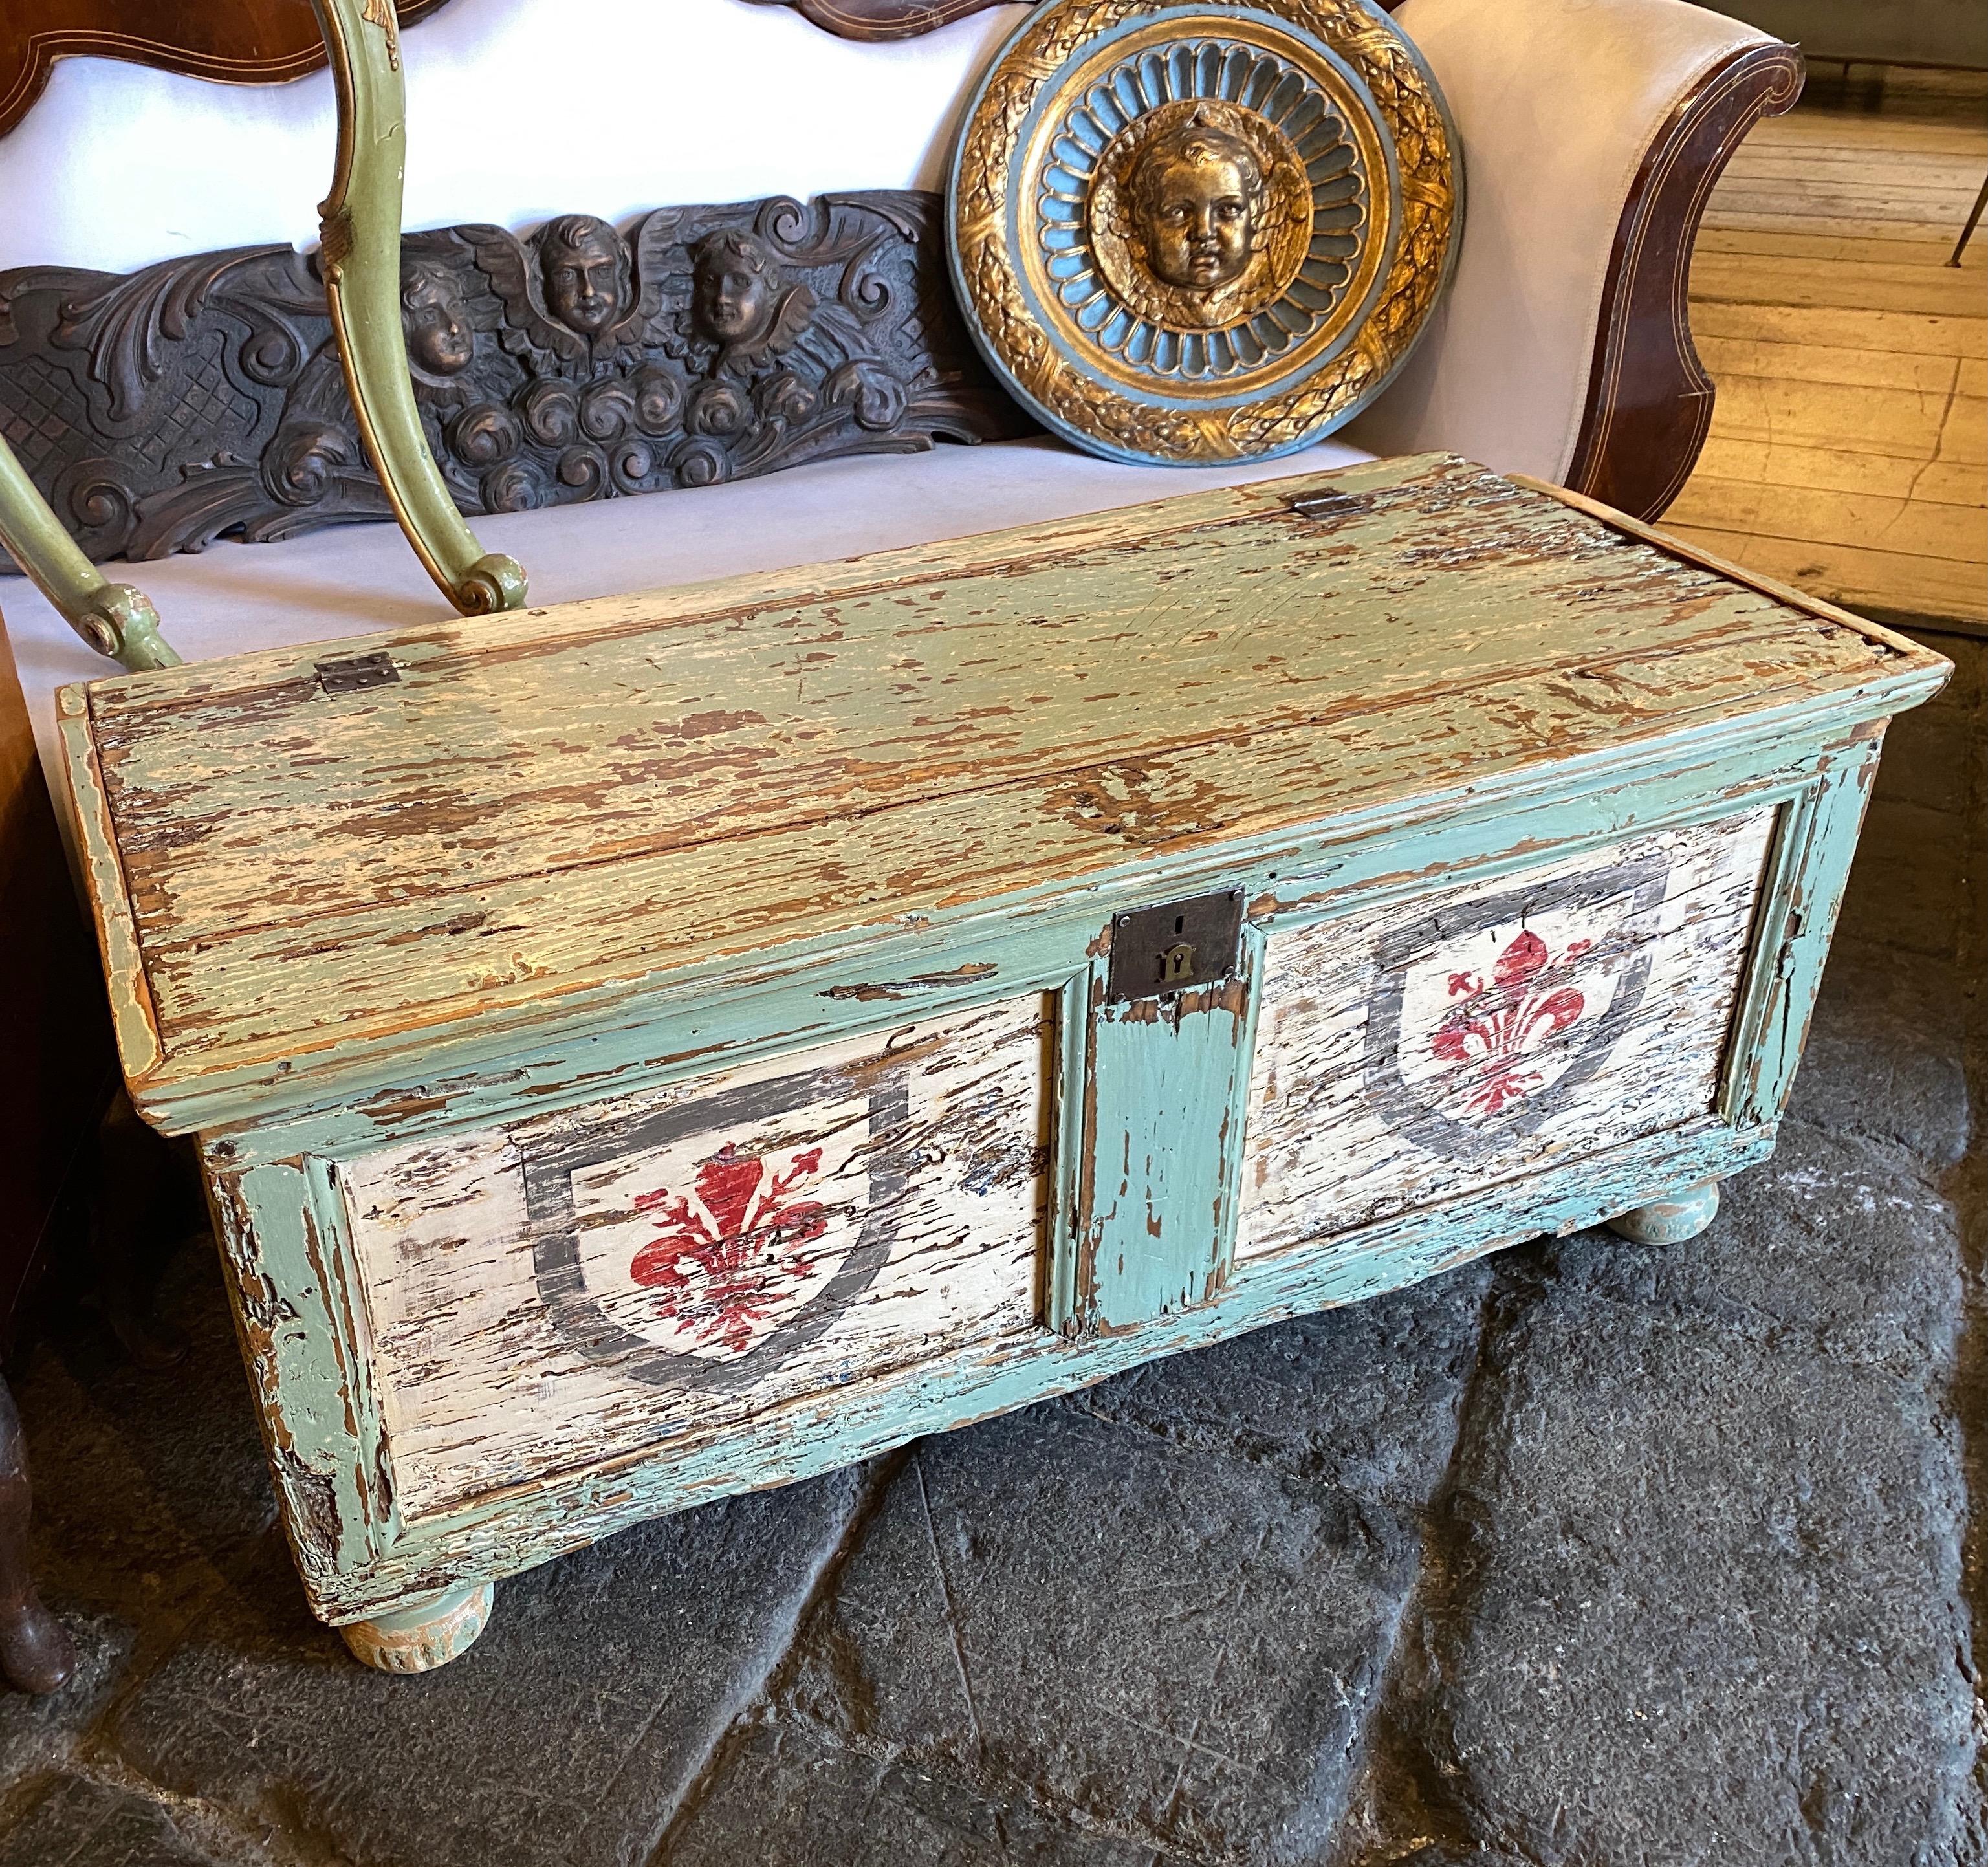 A Light green lacquered wood chest made in Tuscany in the second half of 19th century. Noble coat of arms with red lily are on the front and in the sides. Original conditions